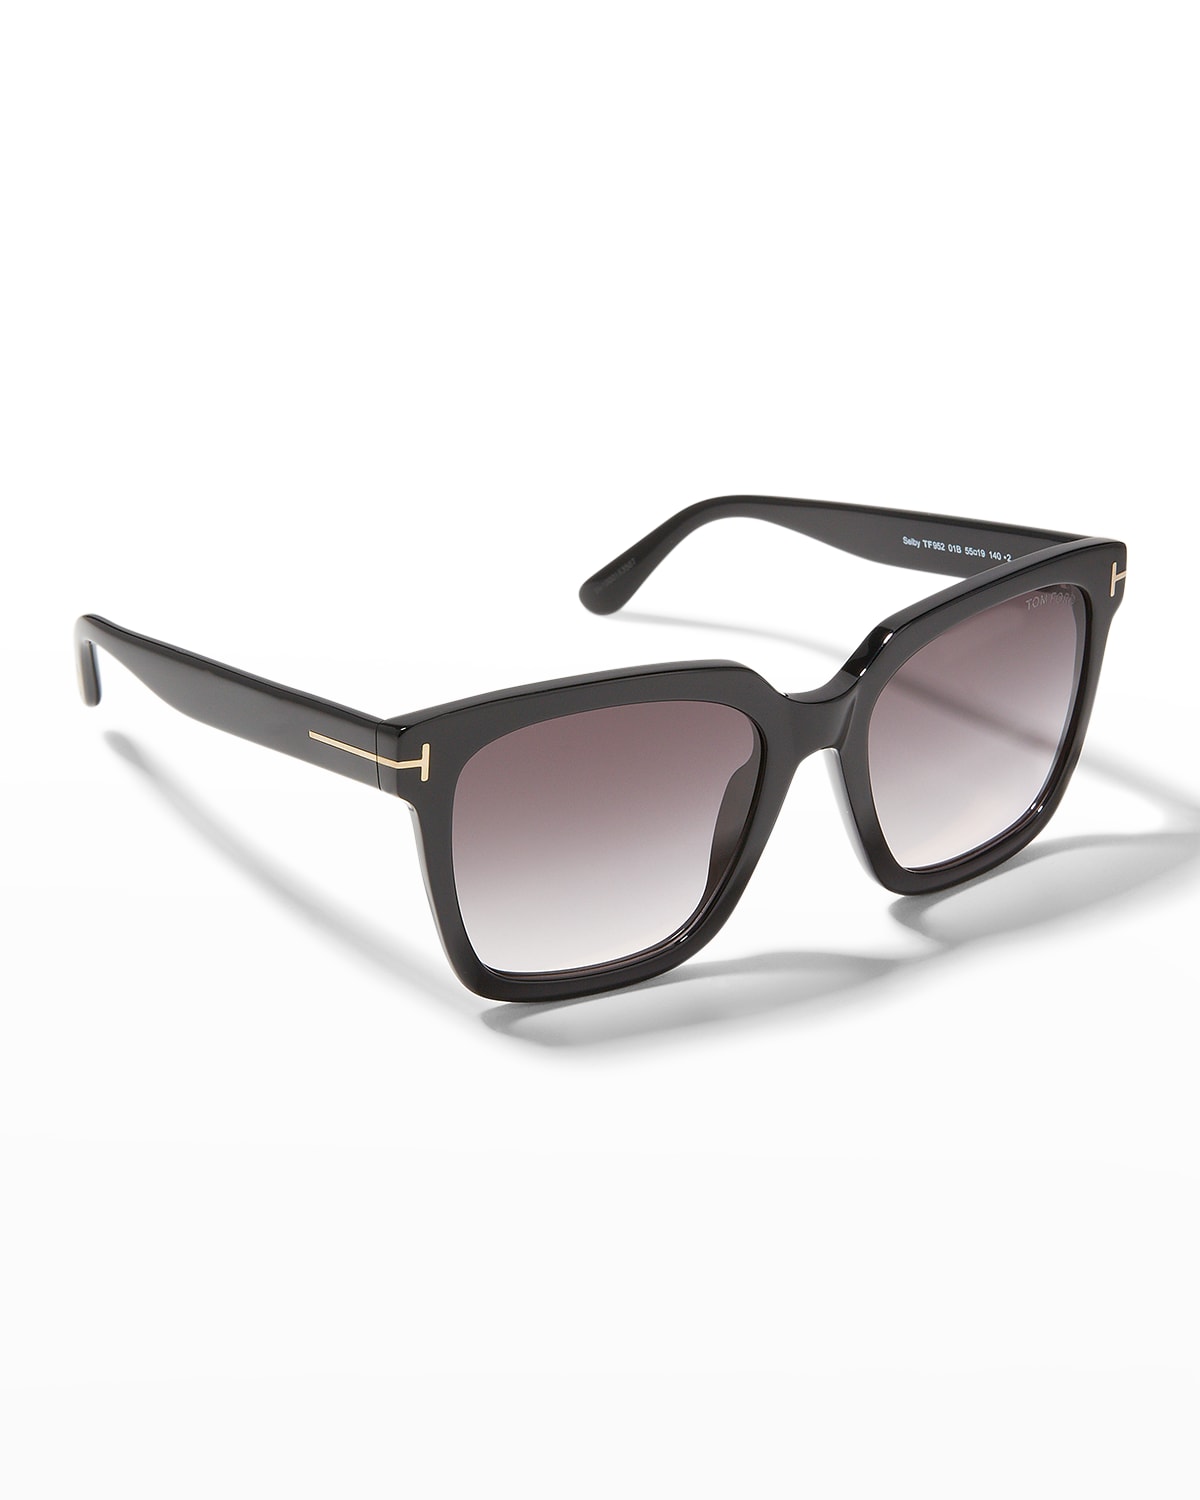 TOM FORD Women's Selby 55mm Square Sunglasses